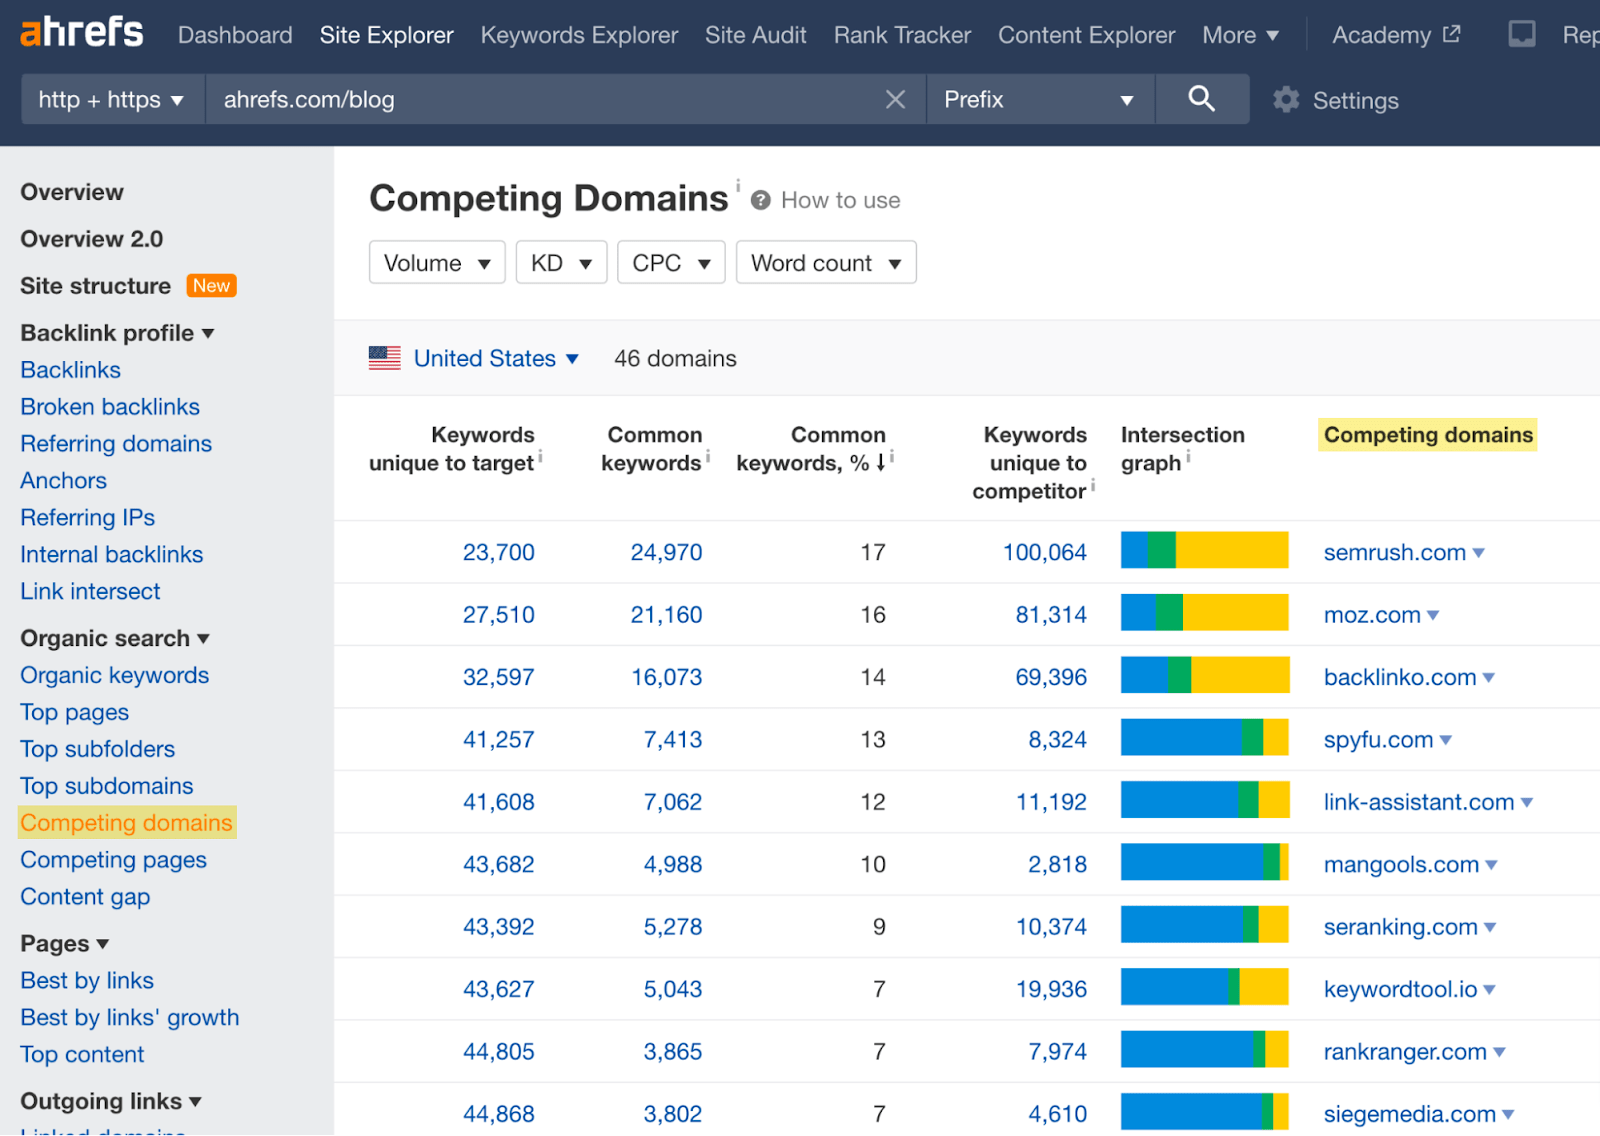 Competing Domains report results for the Ahrefs blog